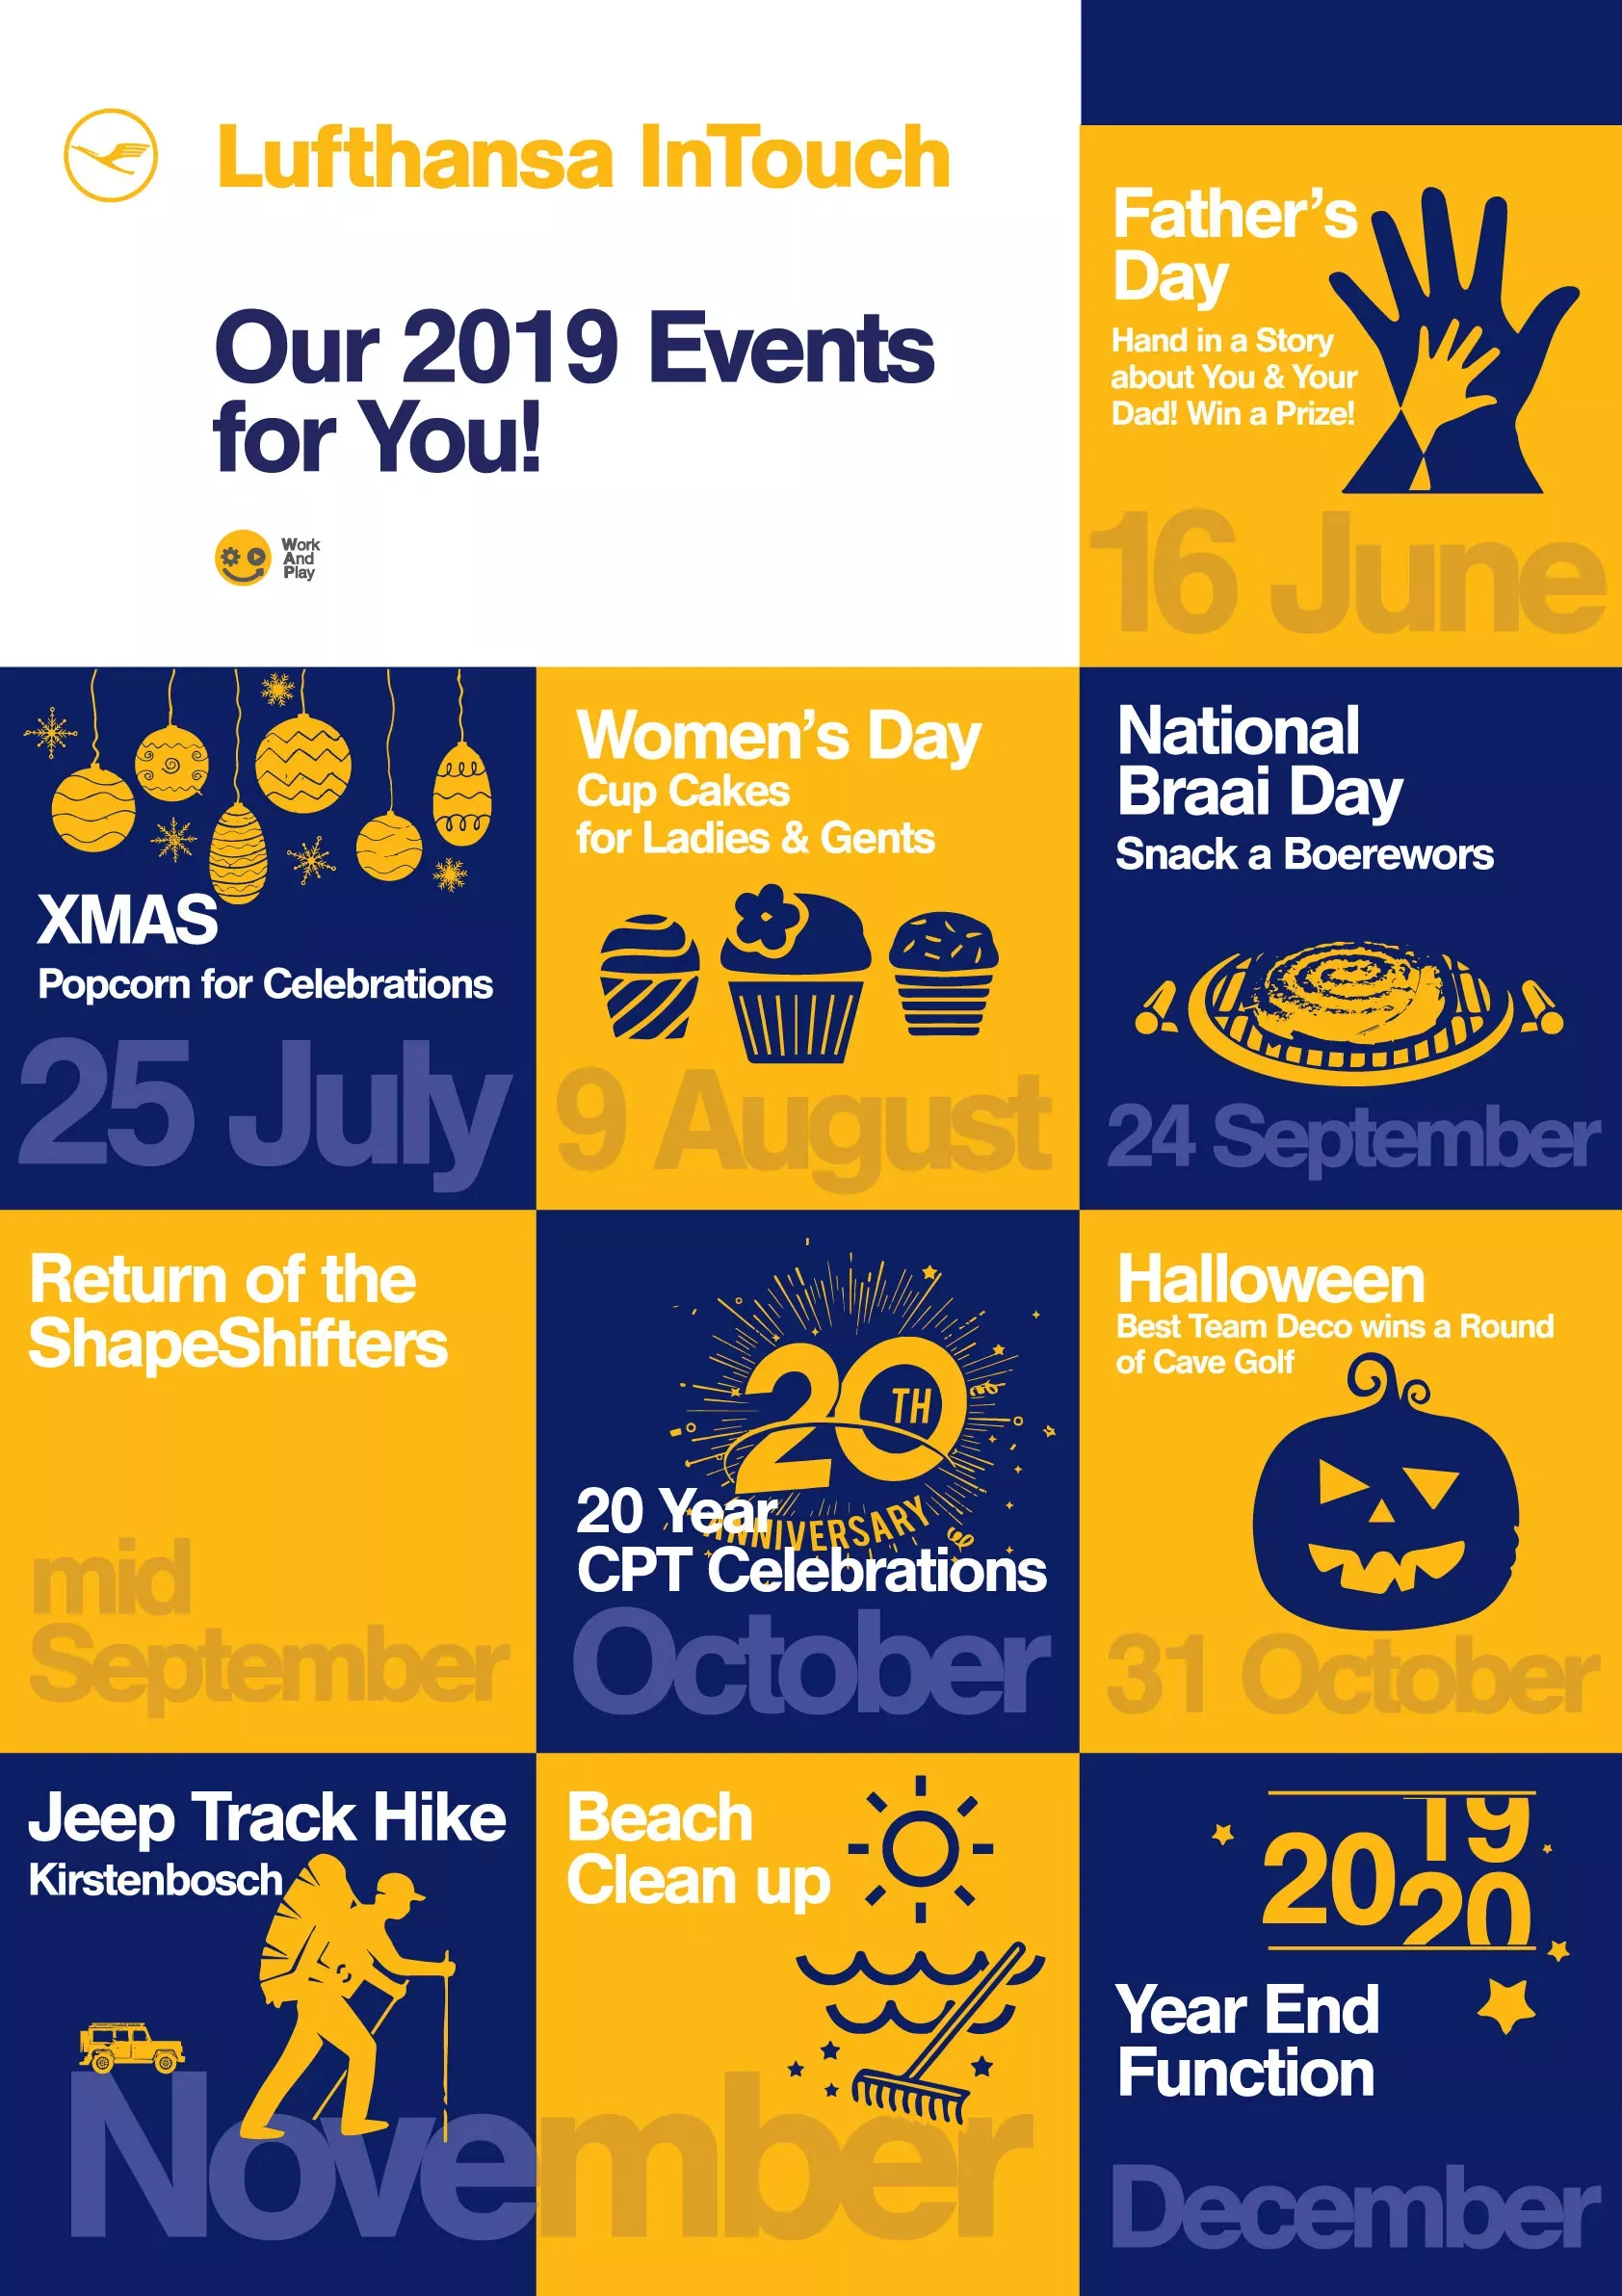 Lufthansa intouch 2019 events poster